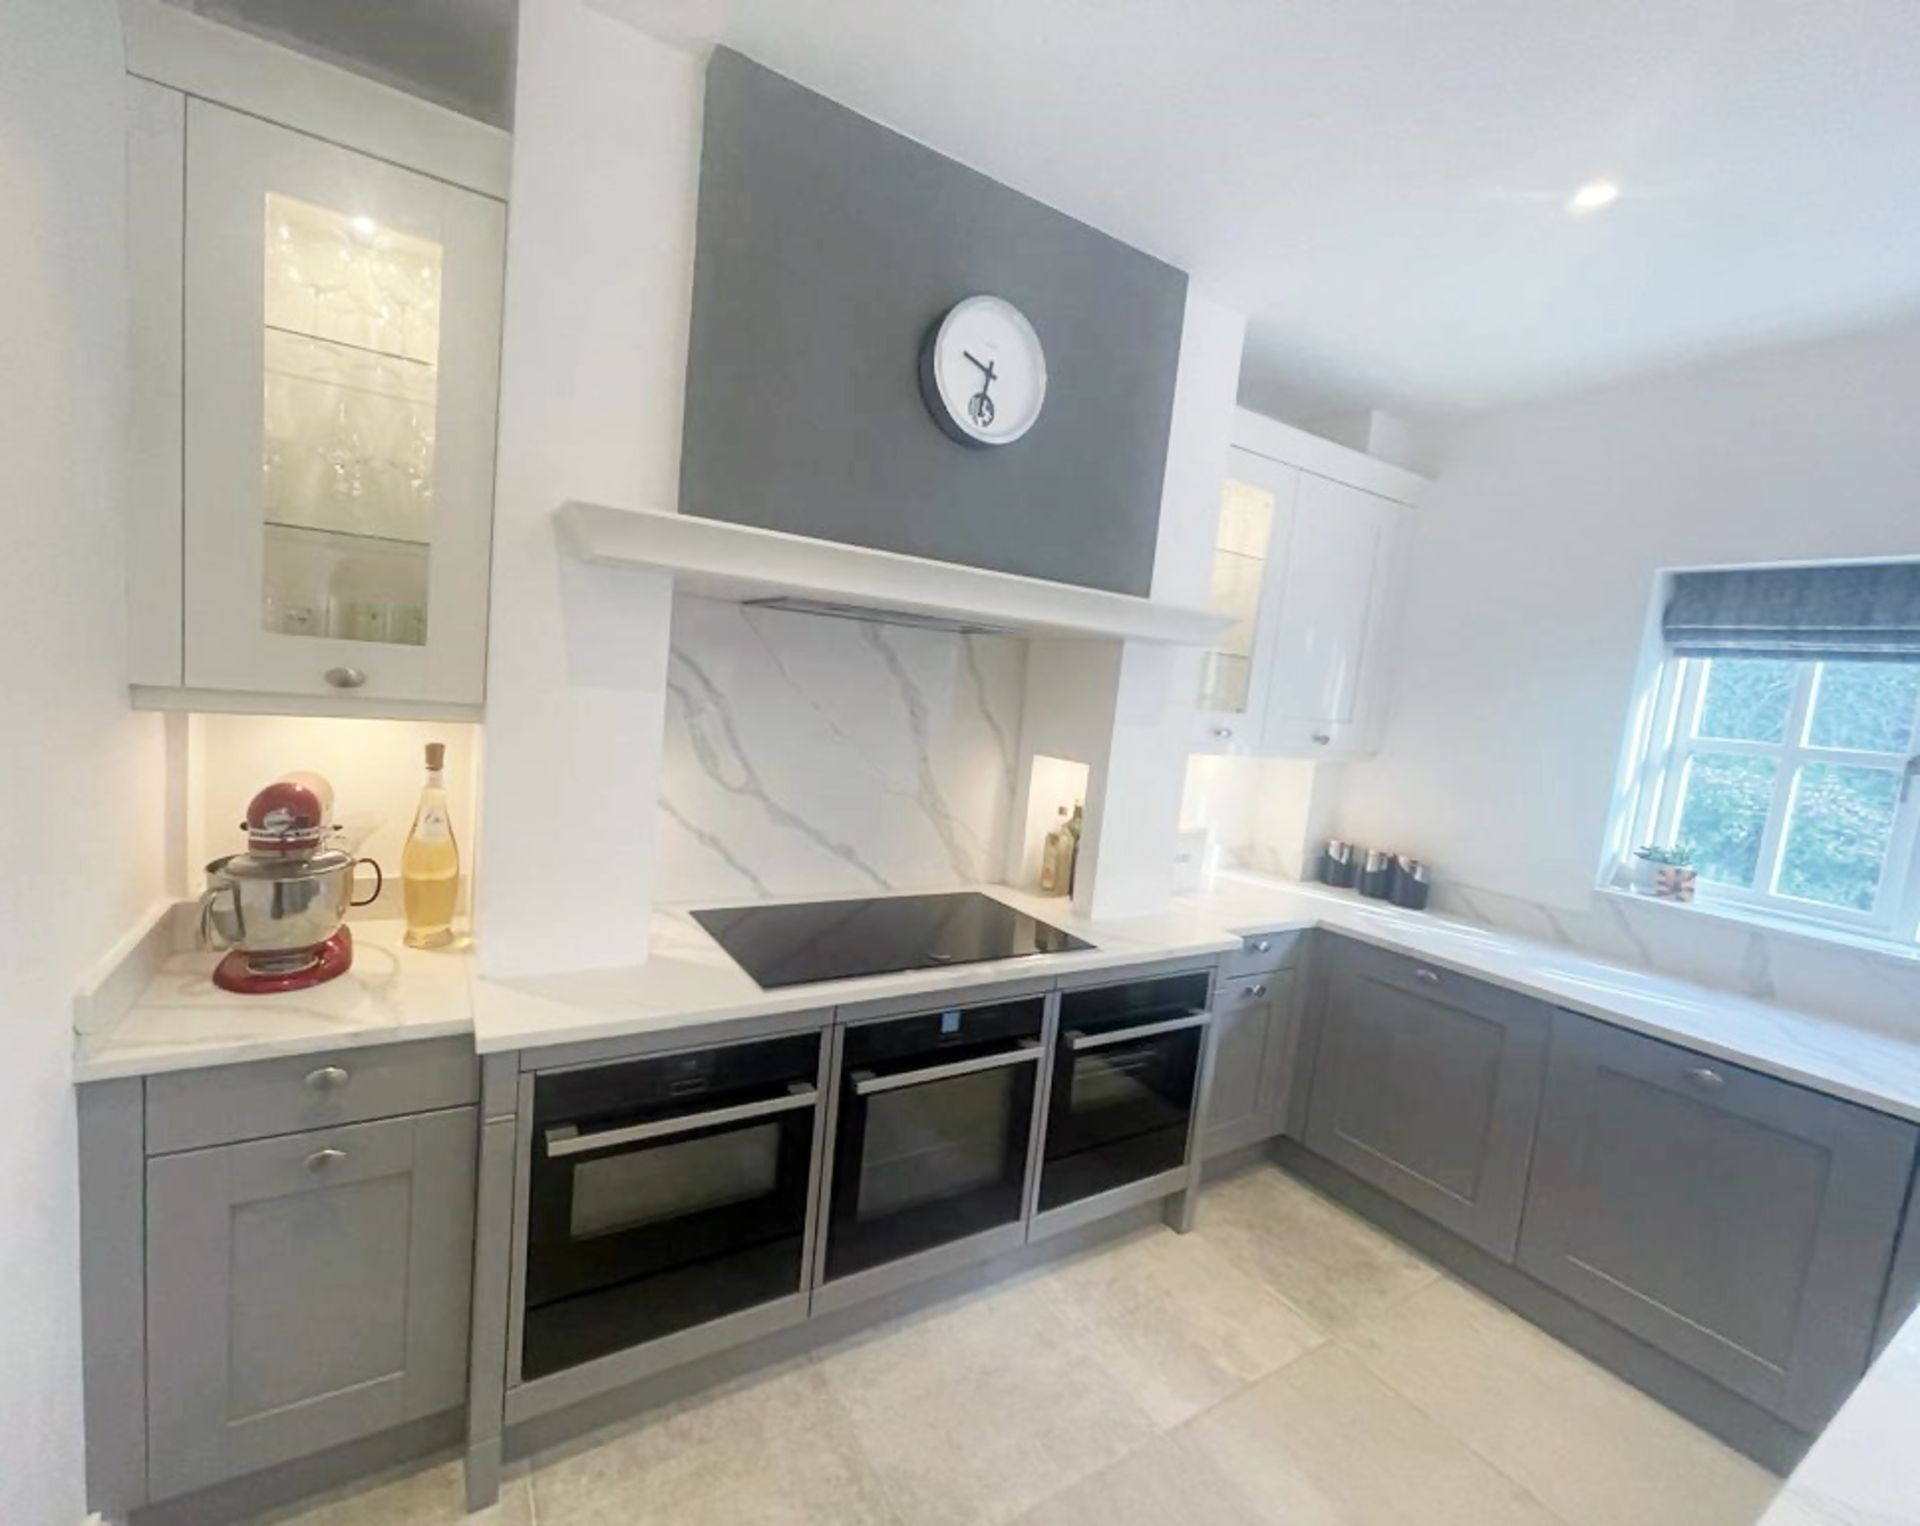 1 x SIEMATIC Bespoke Shaker-style Fitted Kitchen, Utility Room, Appliances & Modern Quartz Surfaces - Image 64 of 99